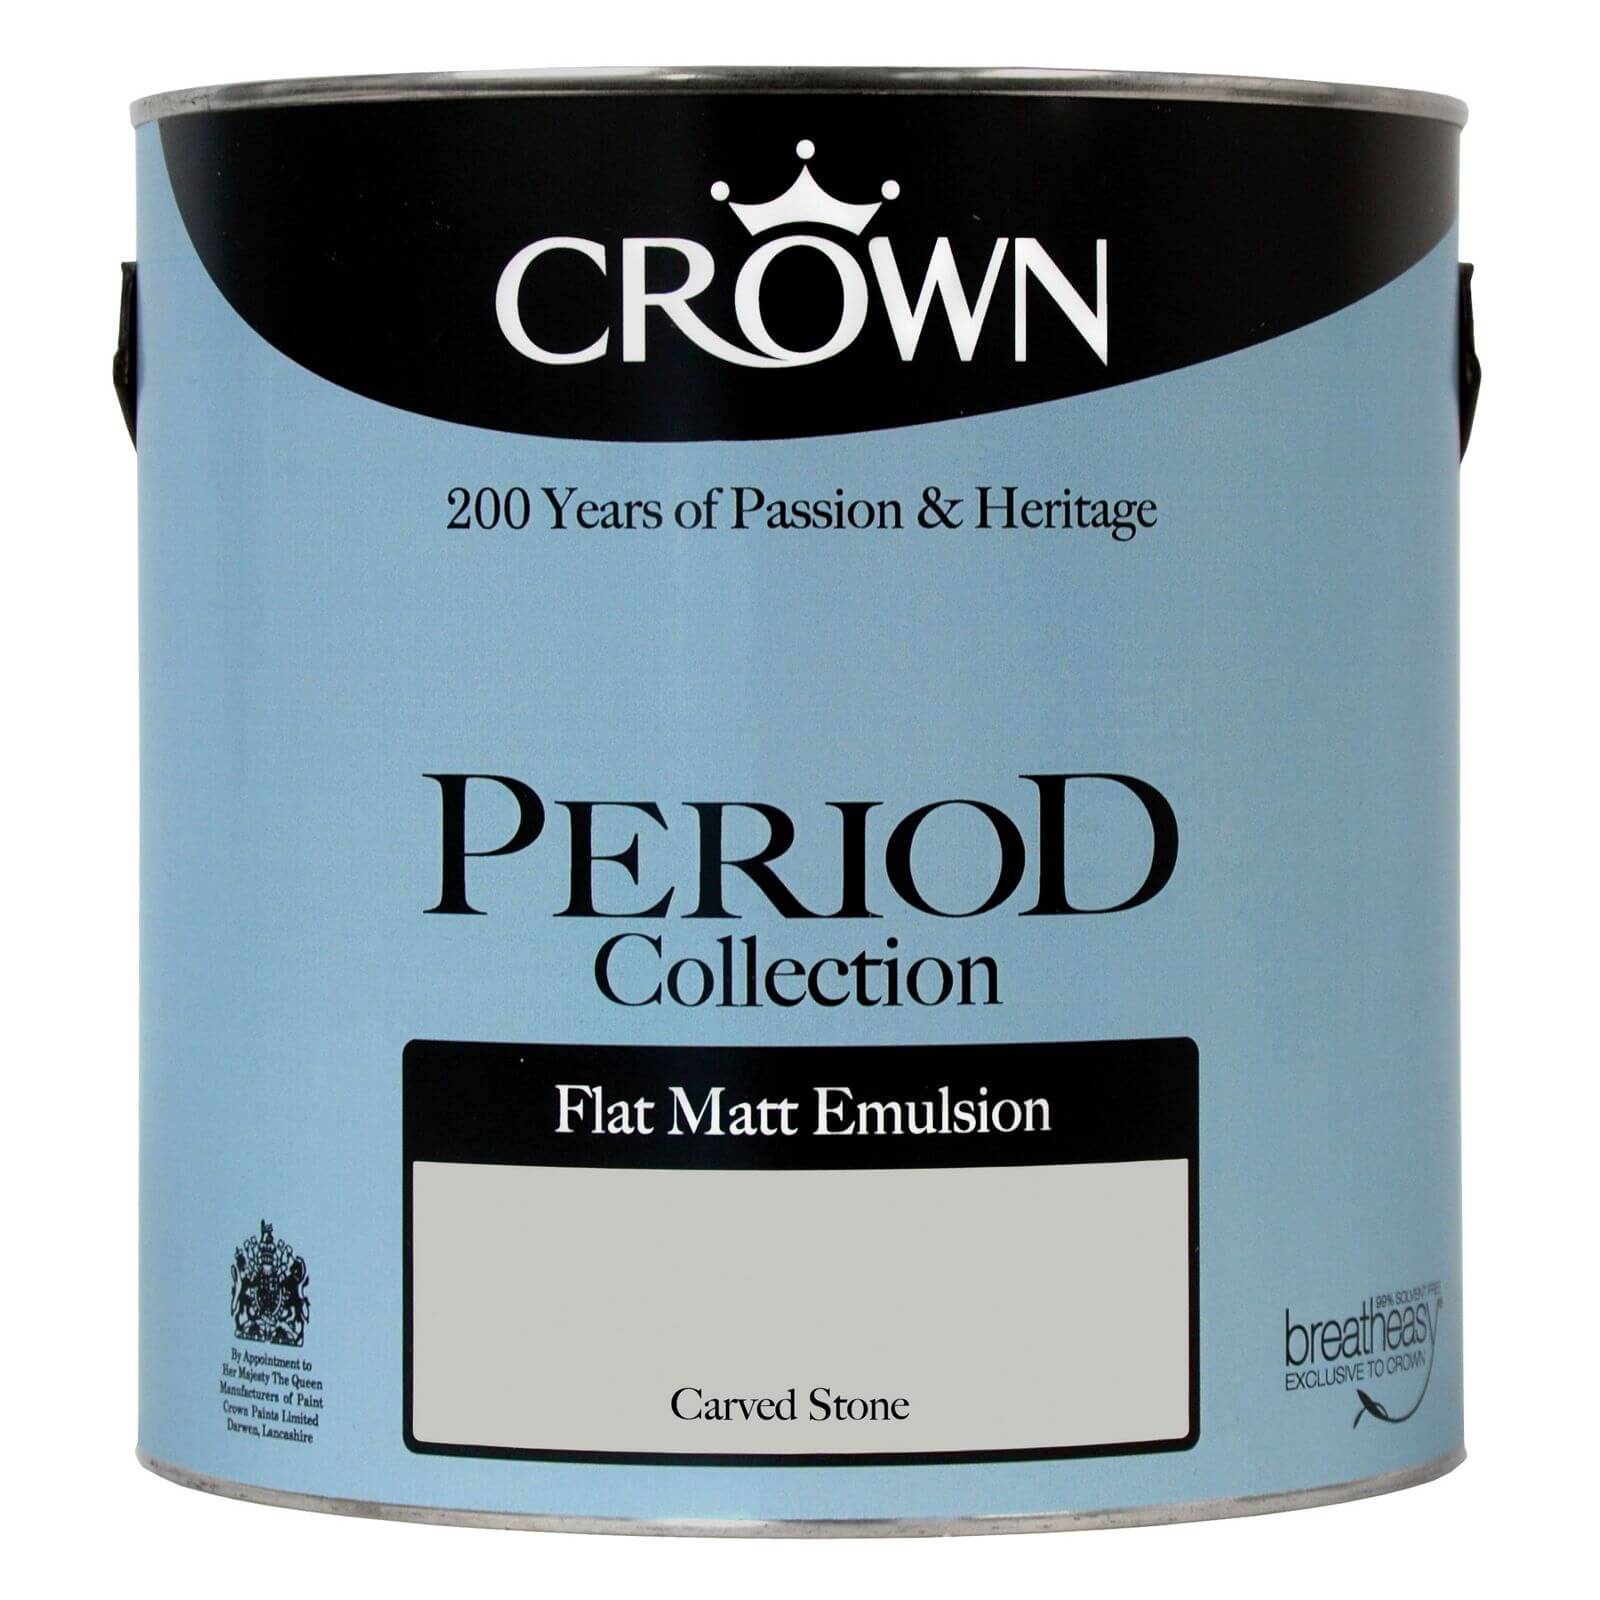 Crown Period Collection Carved Stone - Flat Matt Emulsion Paint - 2.5L